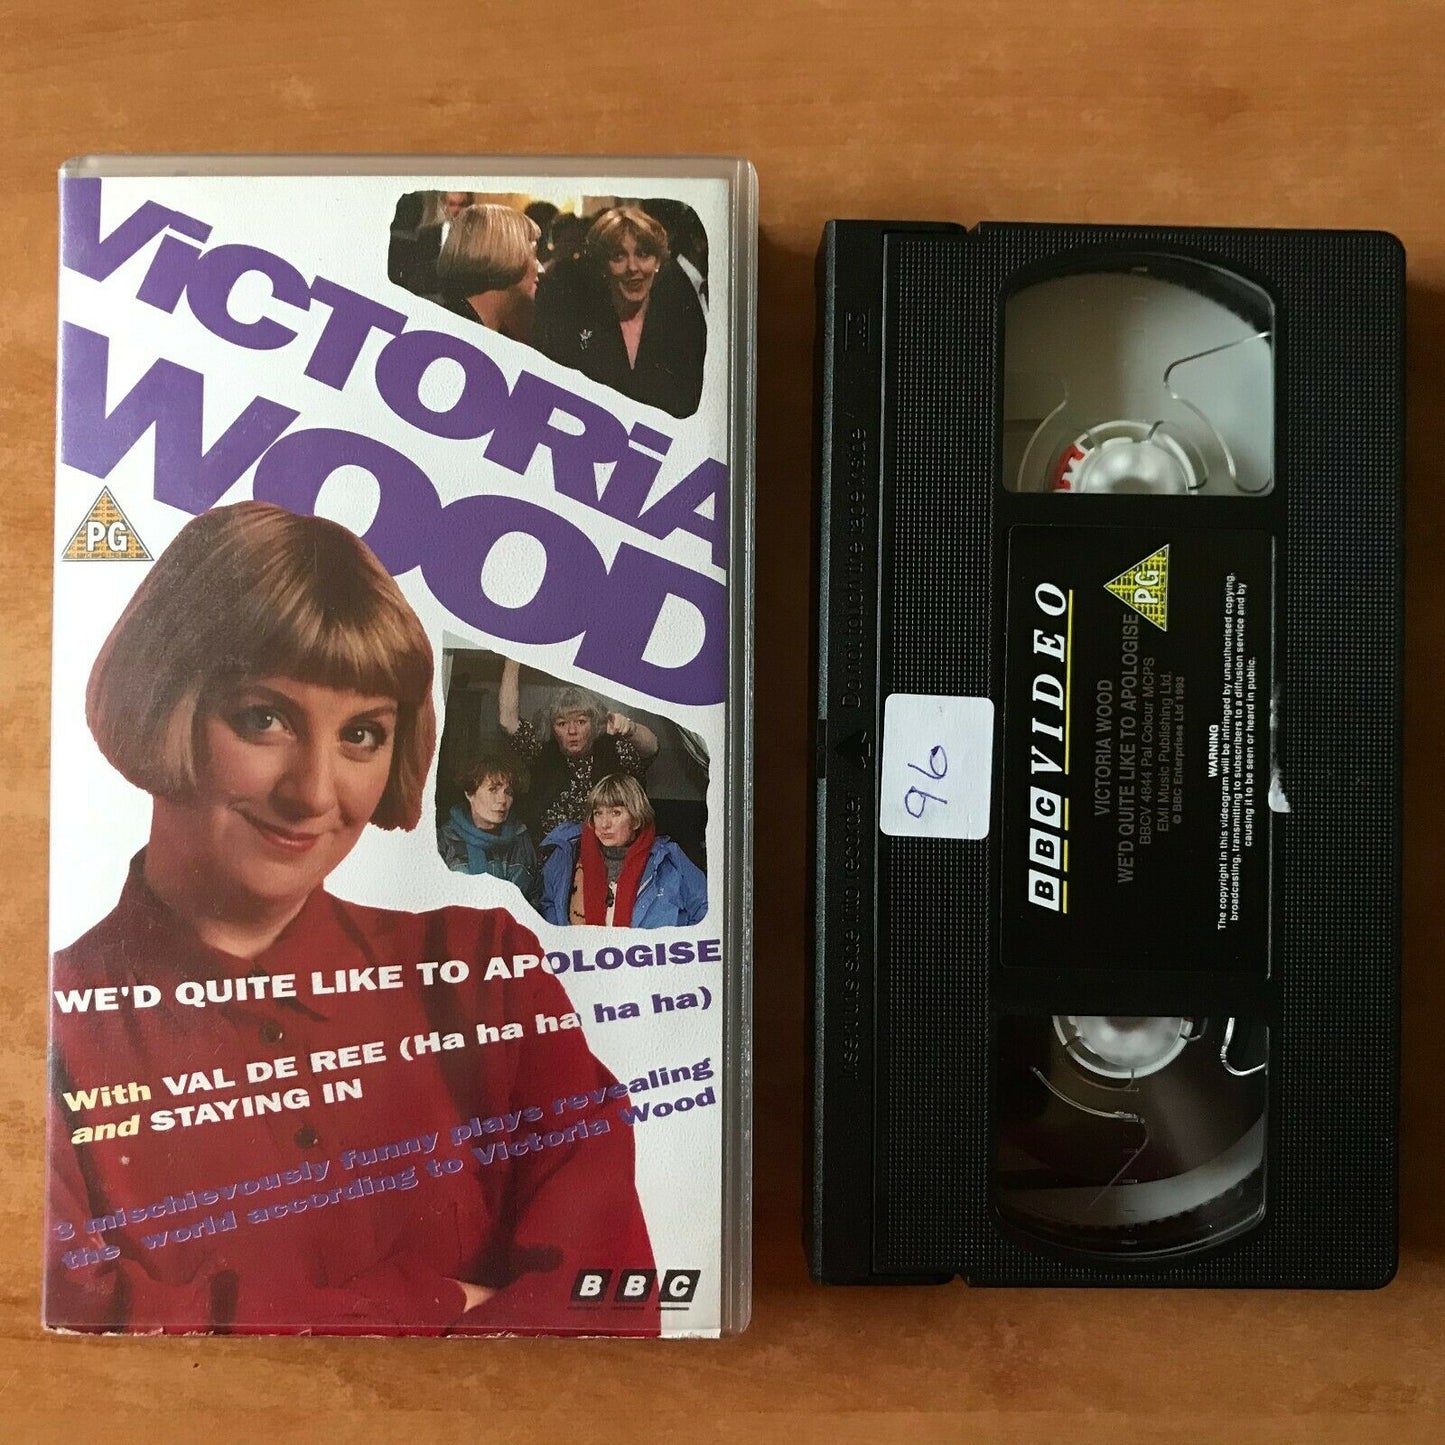 Victoria Wood: We'd Quite Like To Apologise [BBC] TV Series - Comedy - Pal VHS-